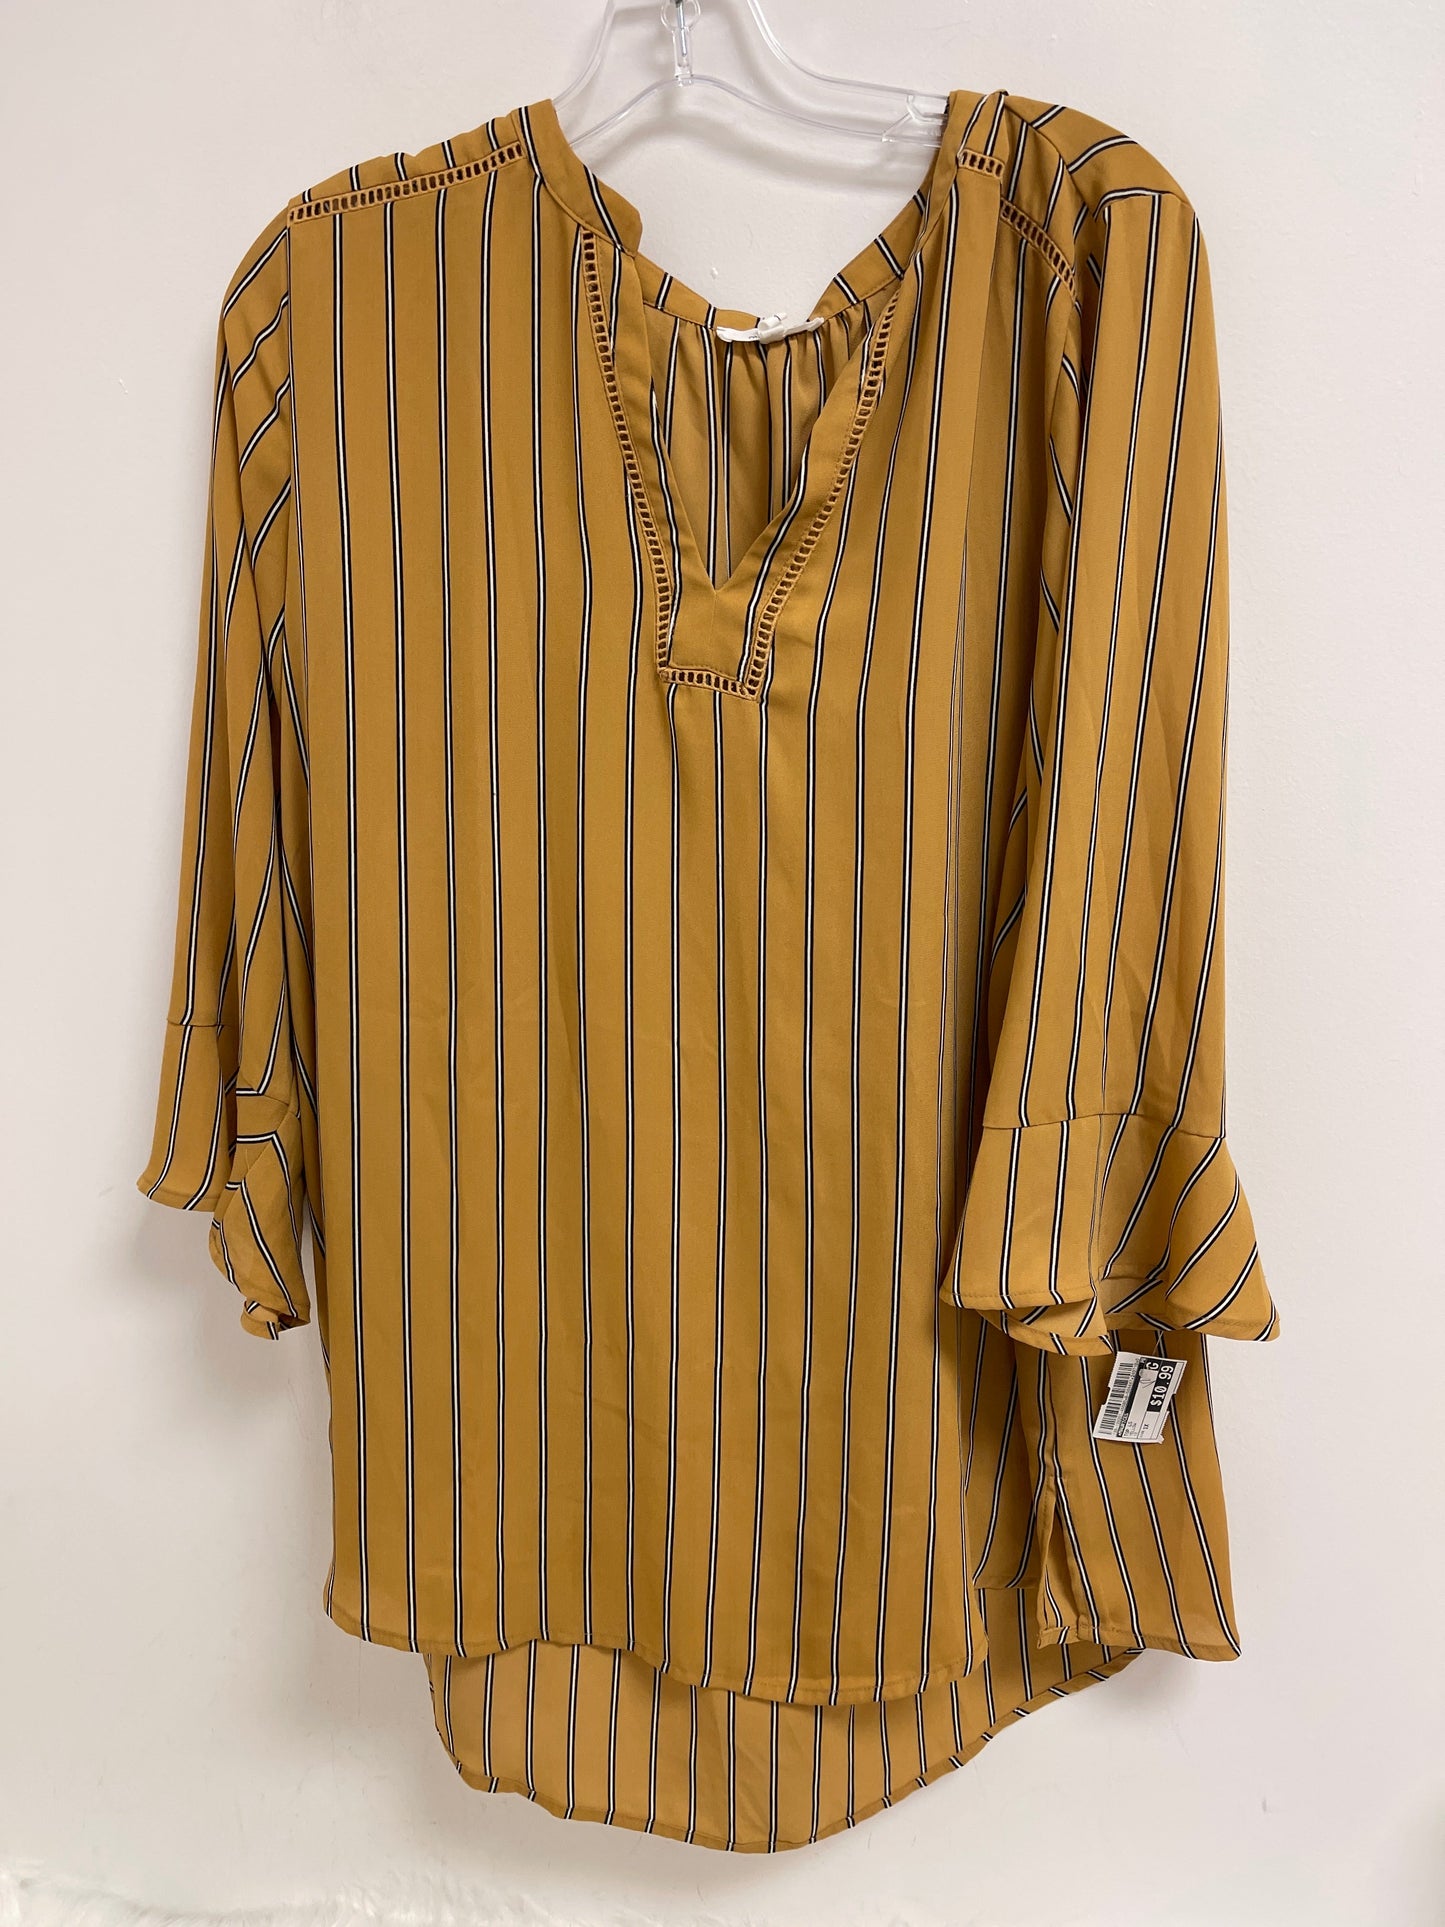 Yellow Top Long Sleeve Maurices, Size 1x